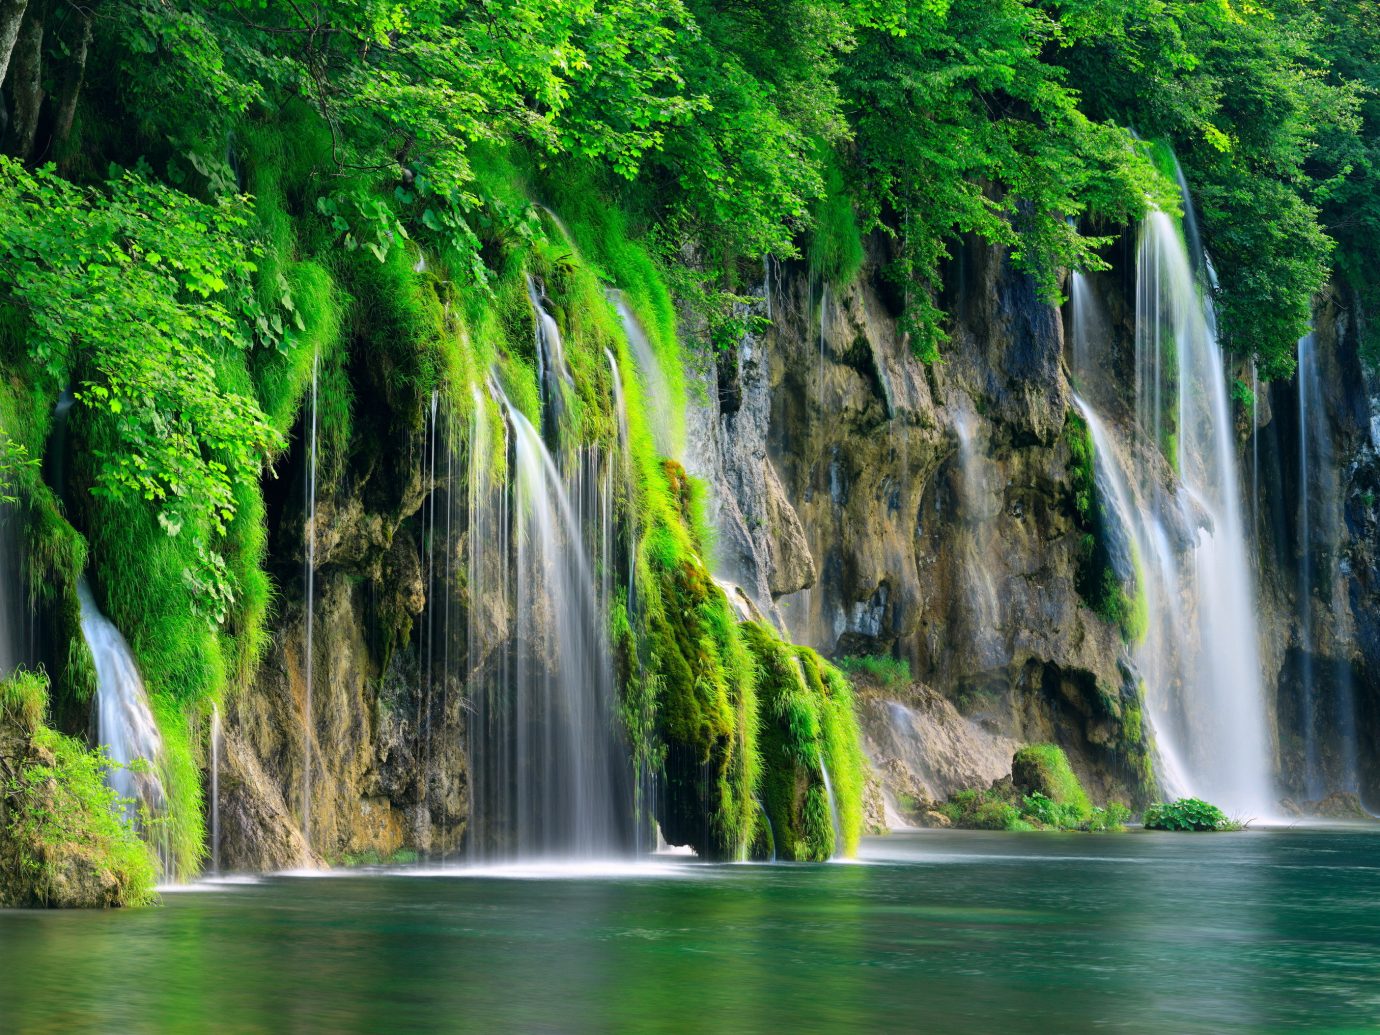 Offbeat Nature tree Waterfall outdoor water body of water green vegetation water feature watercourse Forest rainforest River wasserfall Jungle stream surrounded wooded